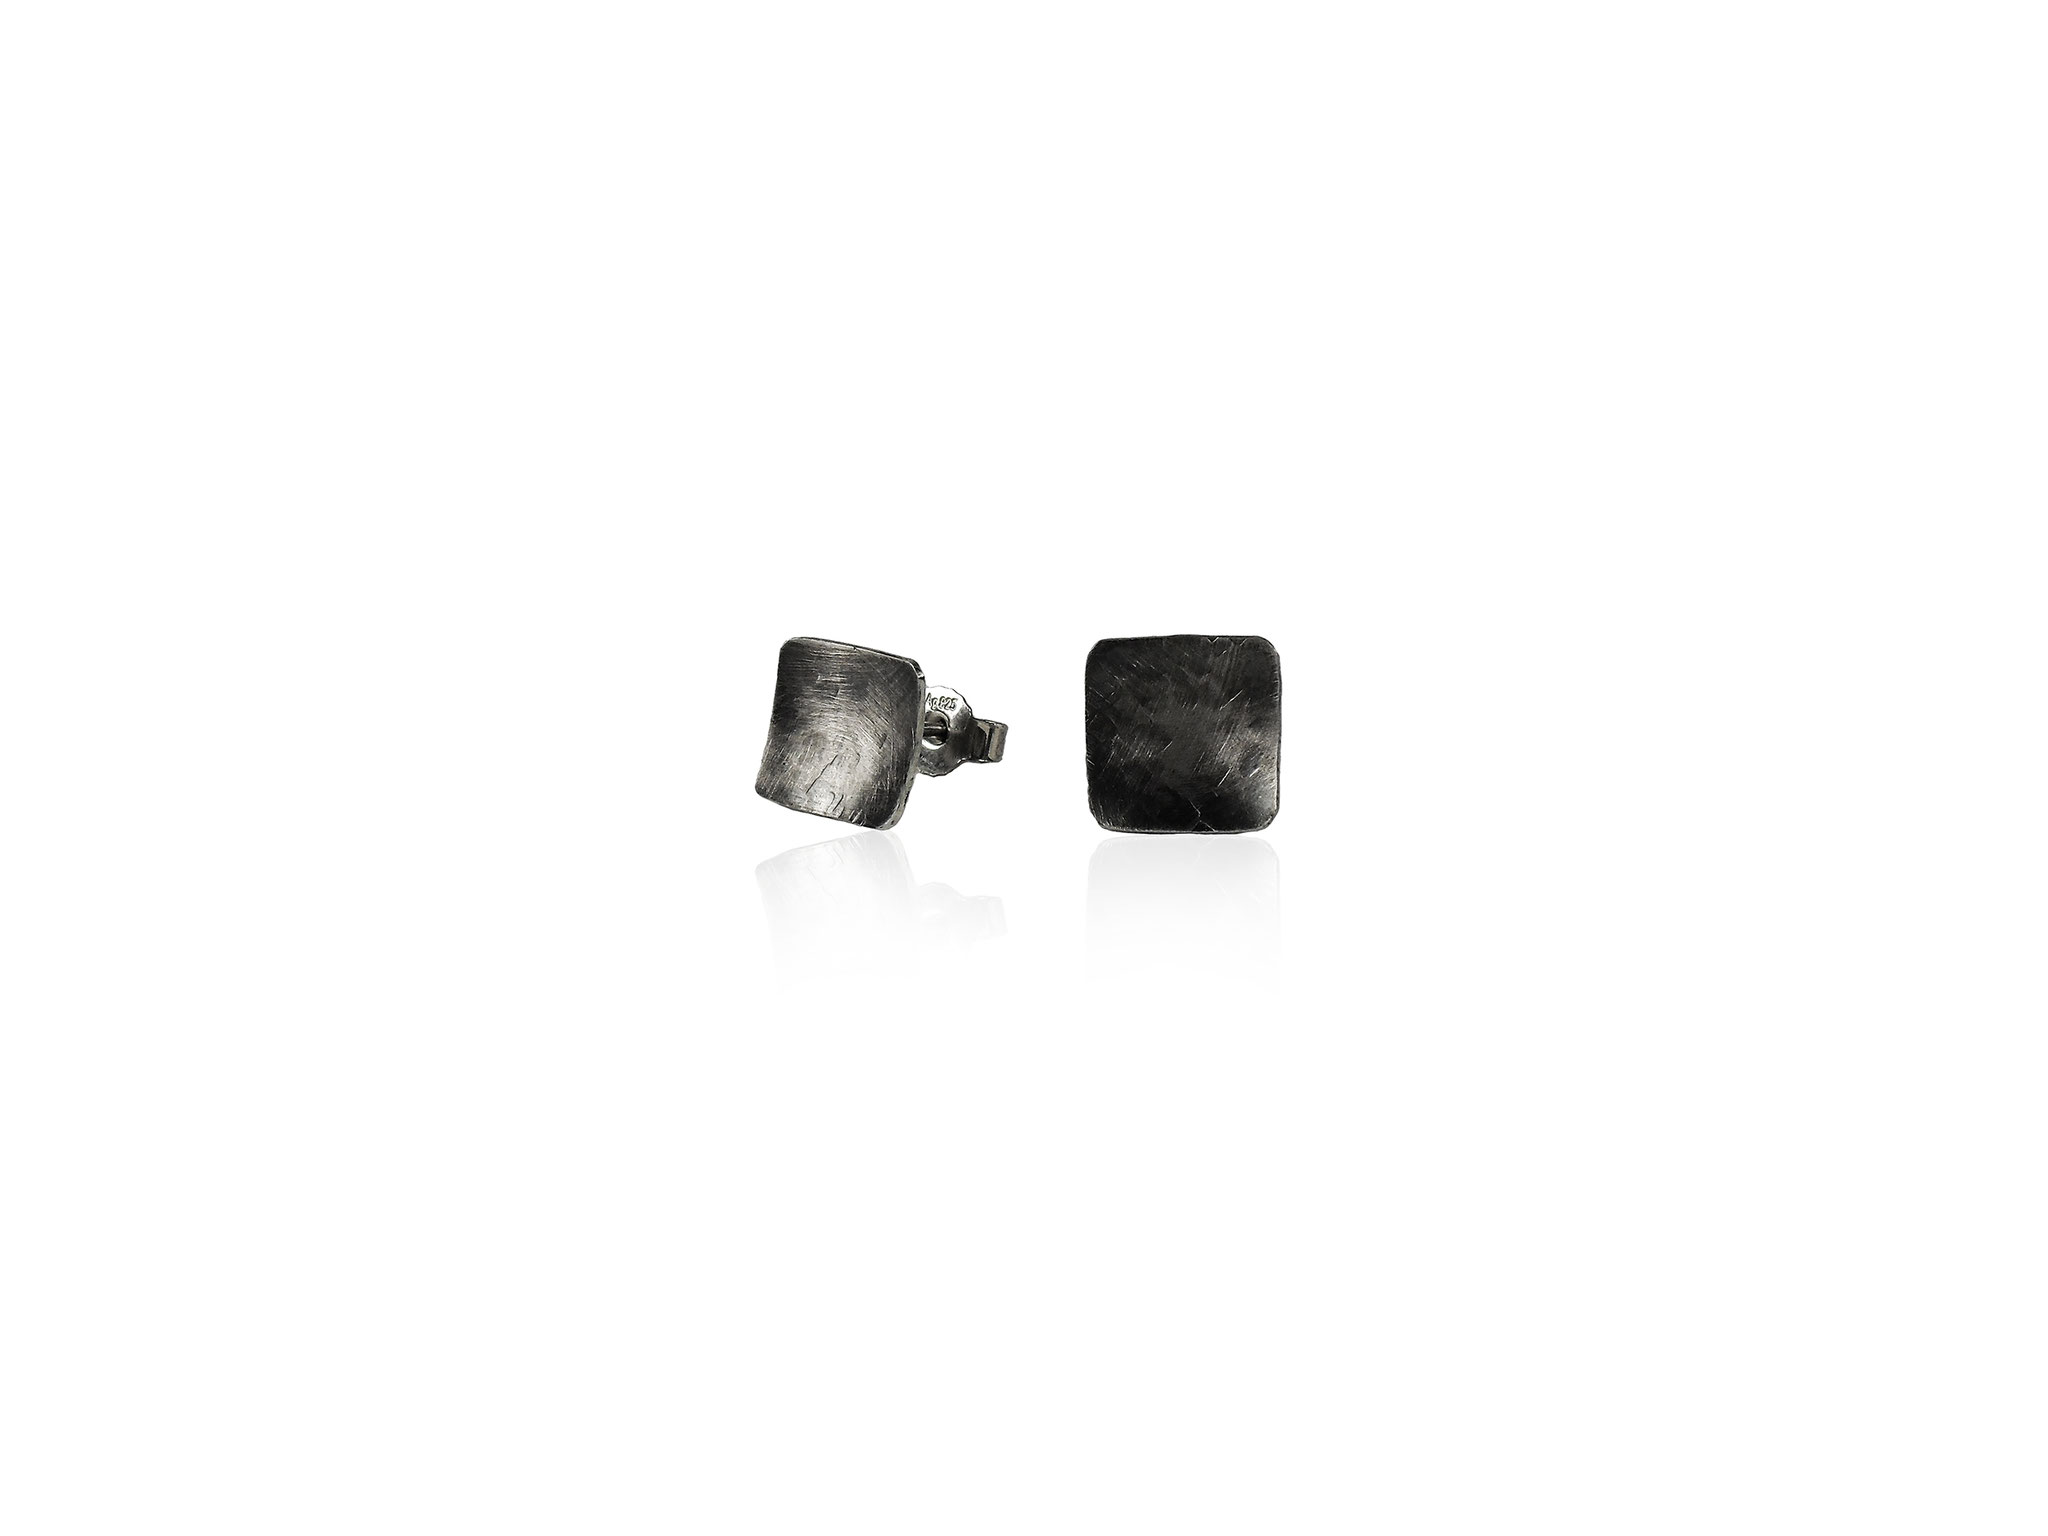 MATERIKA square earstuds - textured and oxidized 925 sterling silver